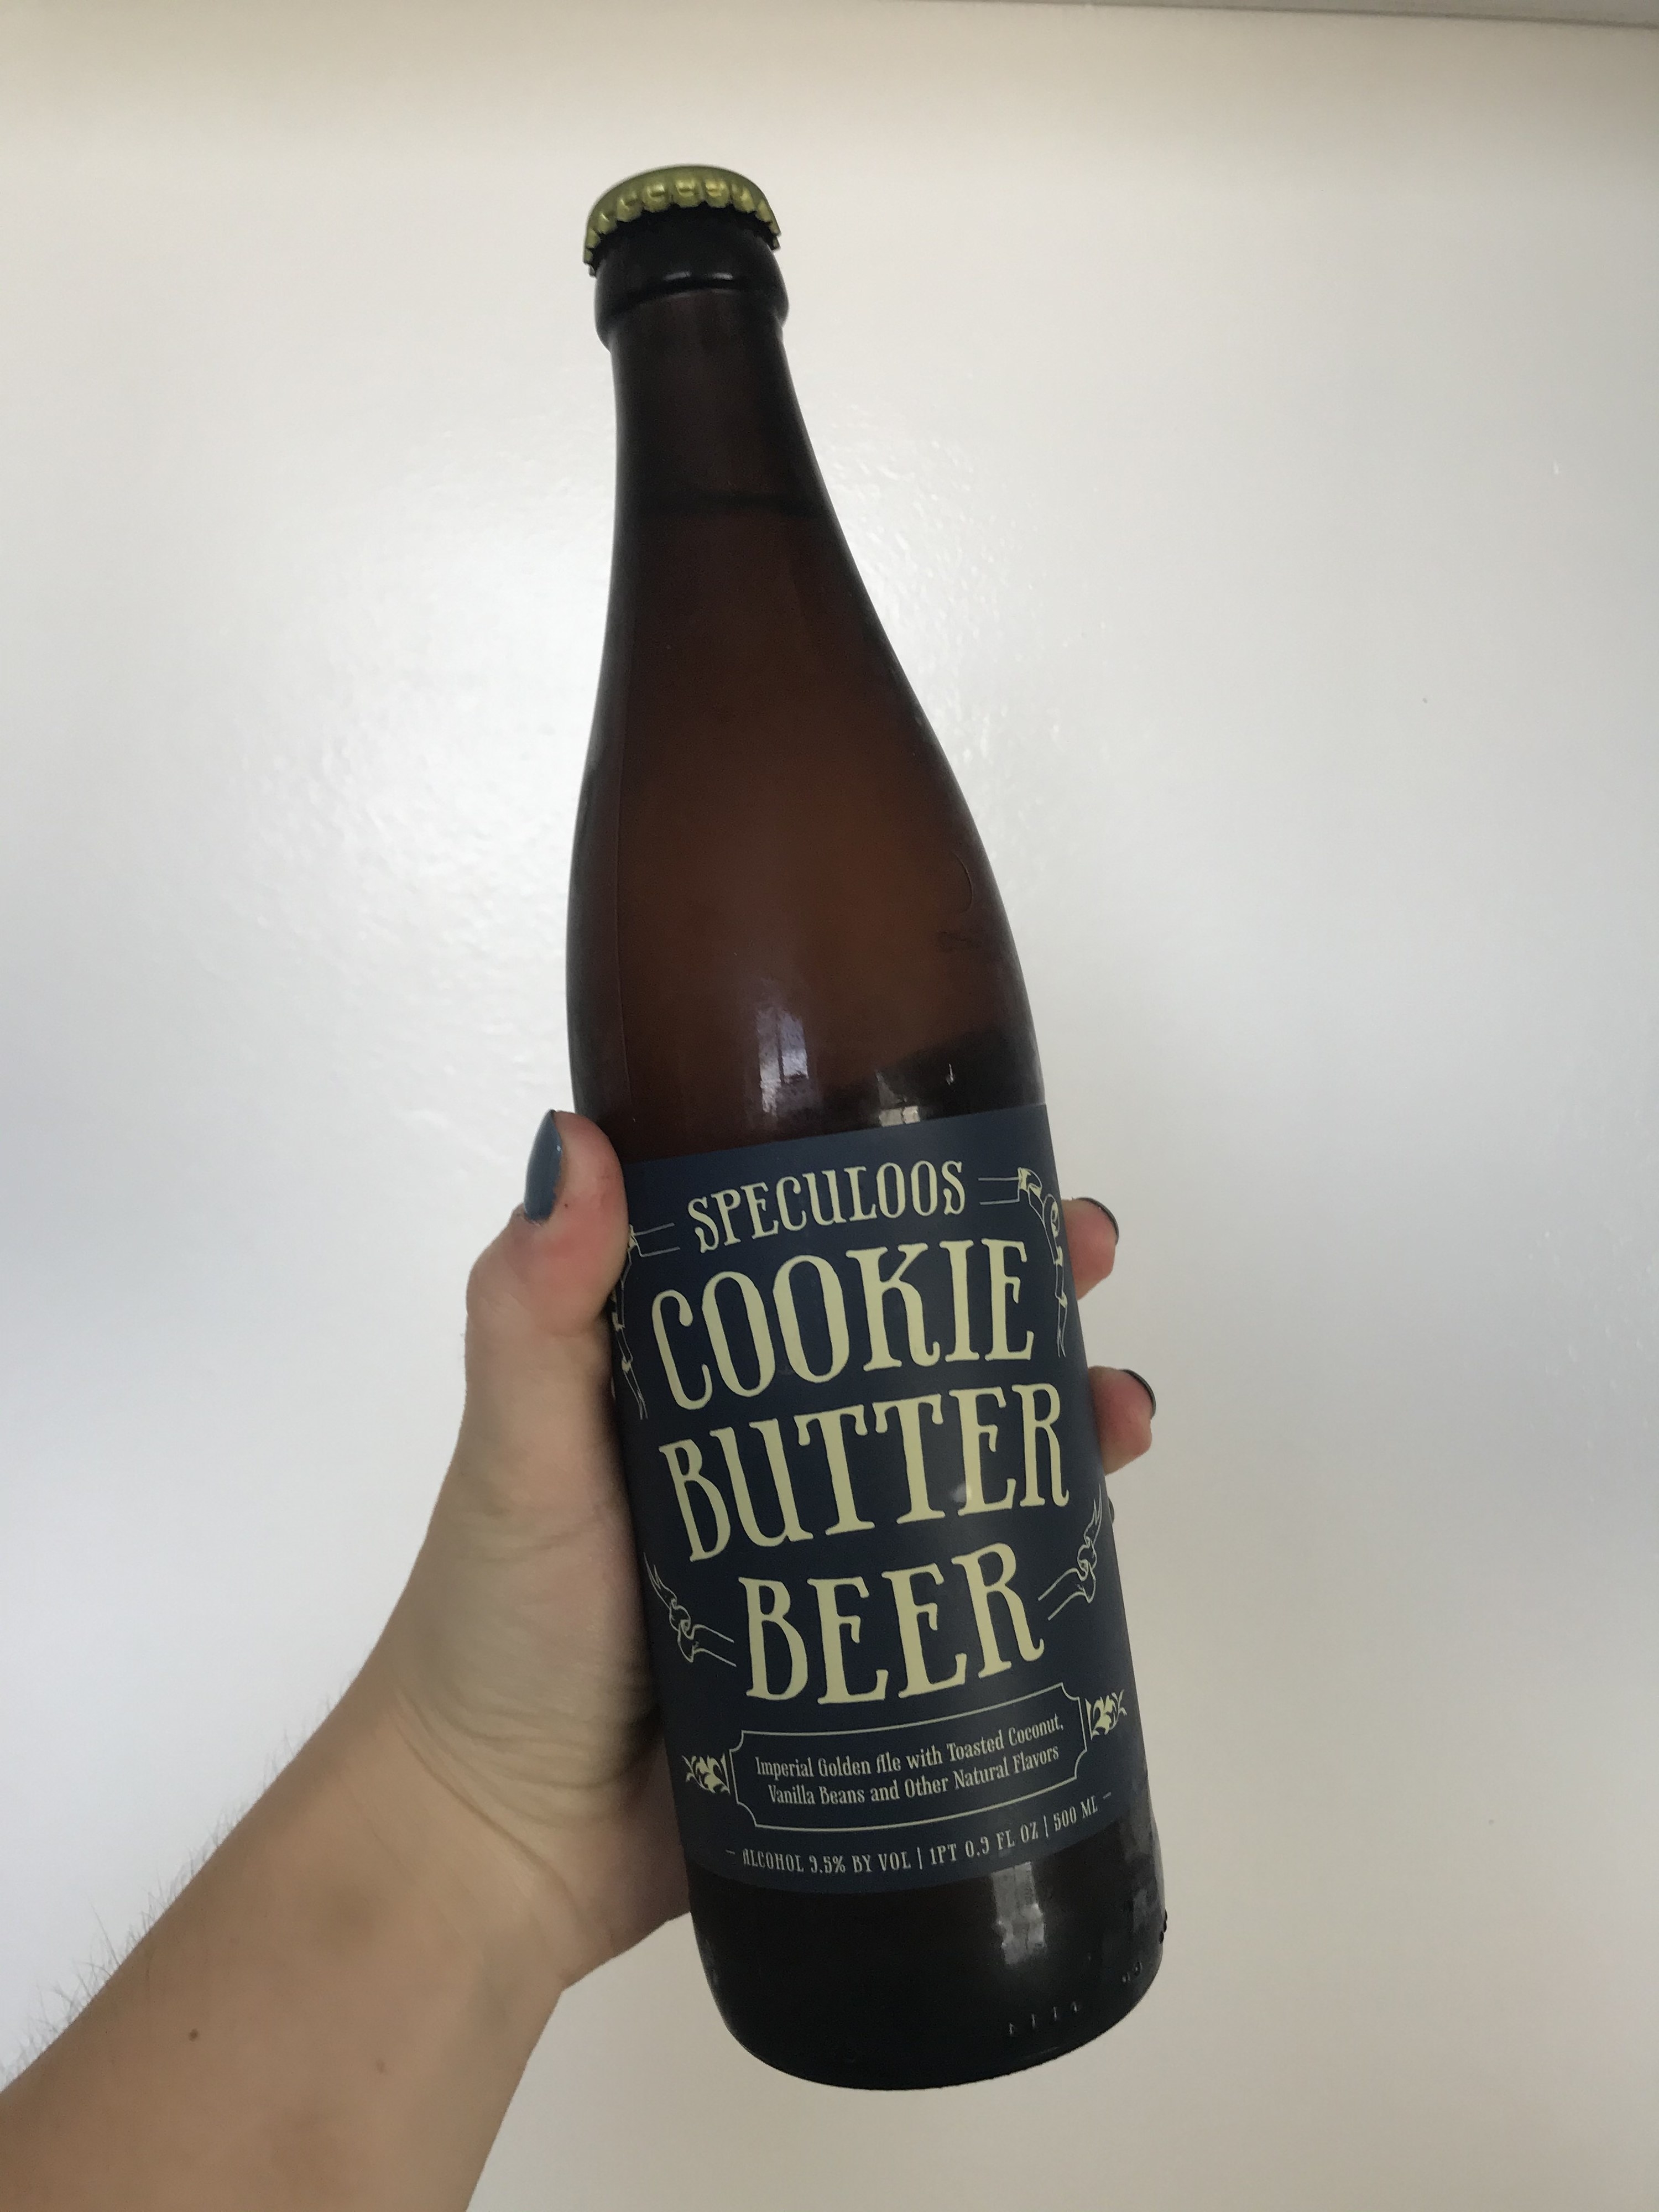 A hand holds up a glass bottle of cookie butter beer against a white backdrop